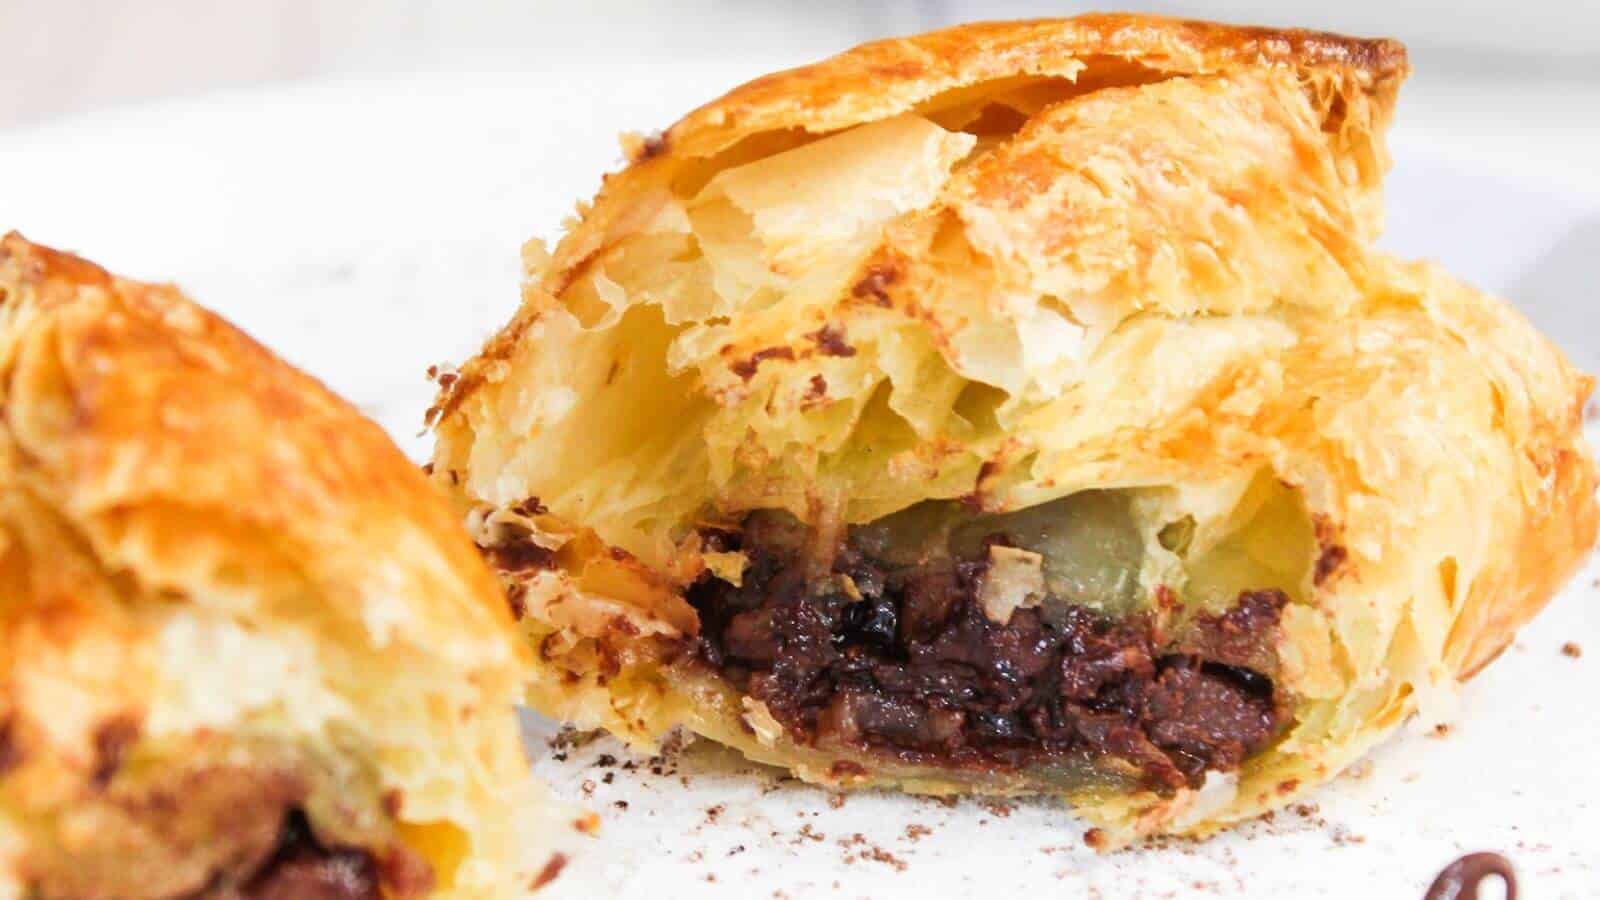 Close-up of a flaky pastry cut open to reveal a filling of chocolate, with a visible crispy golden crust.